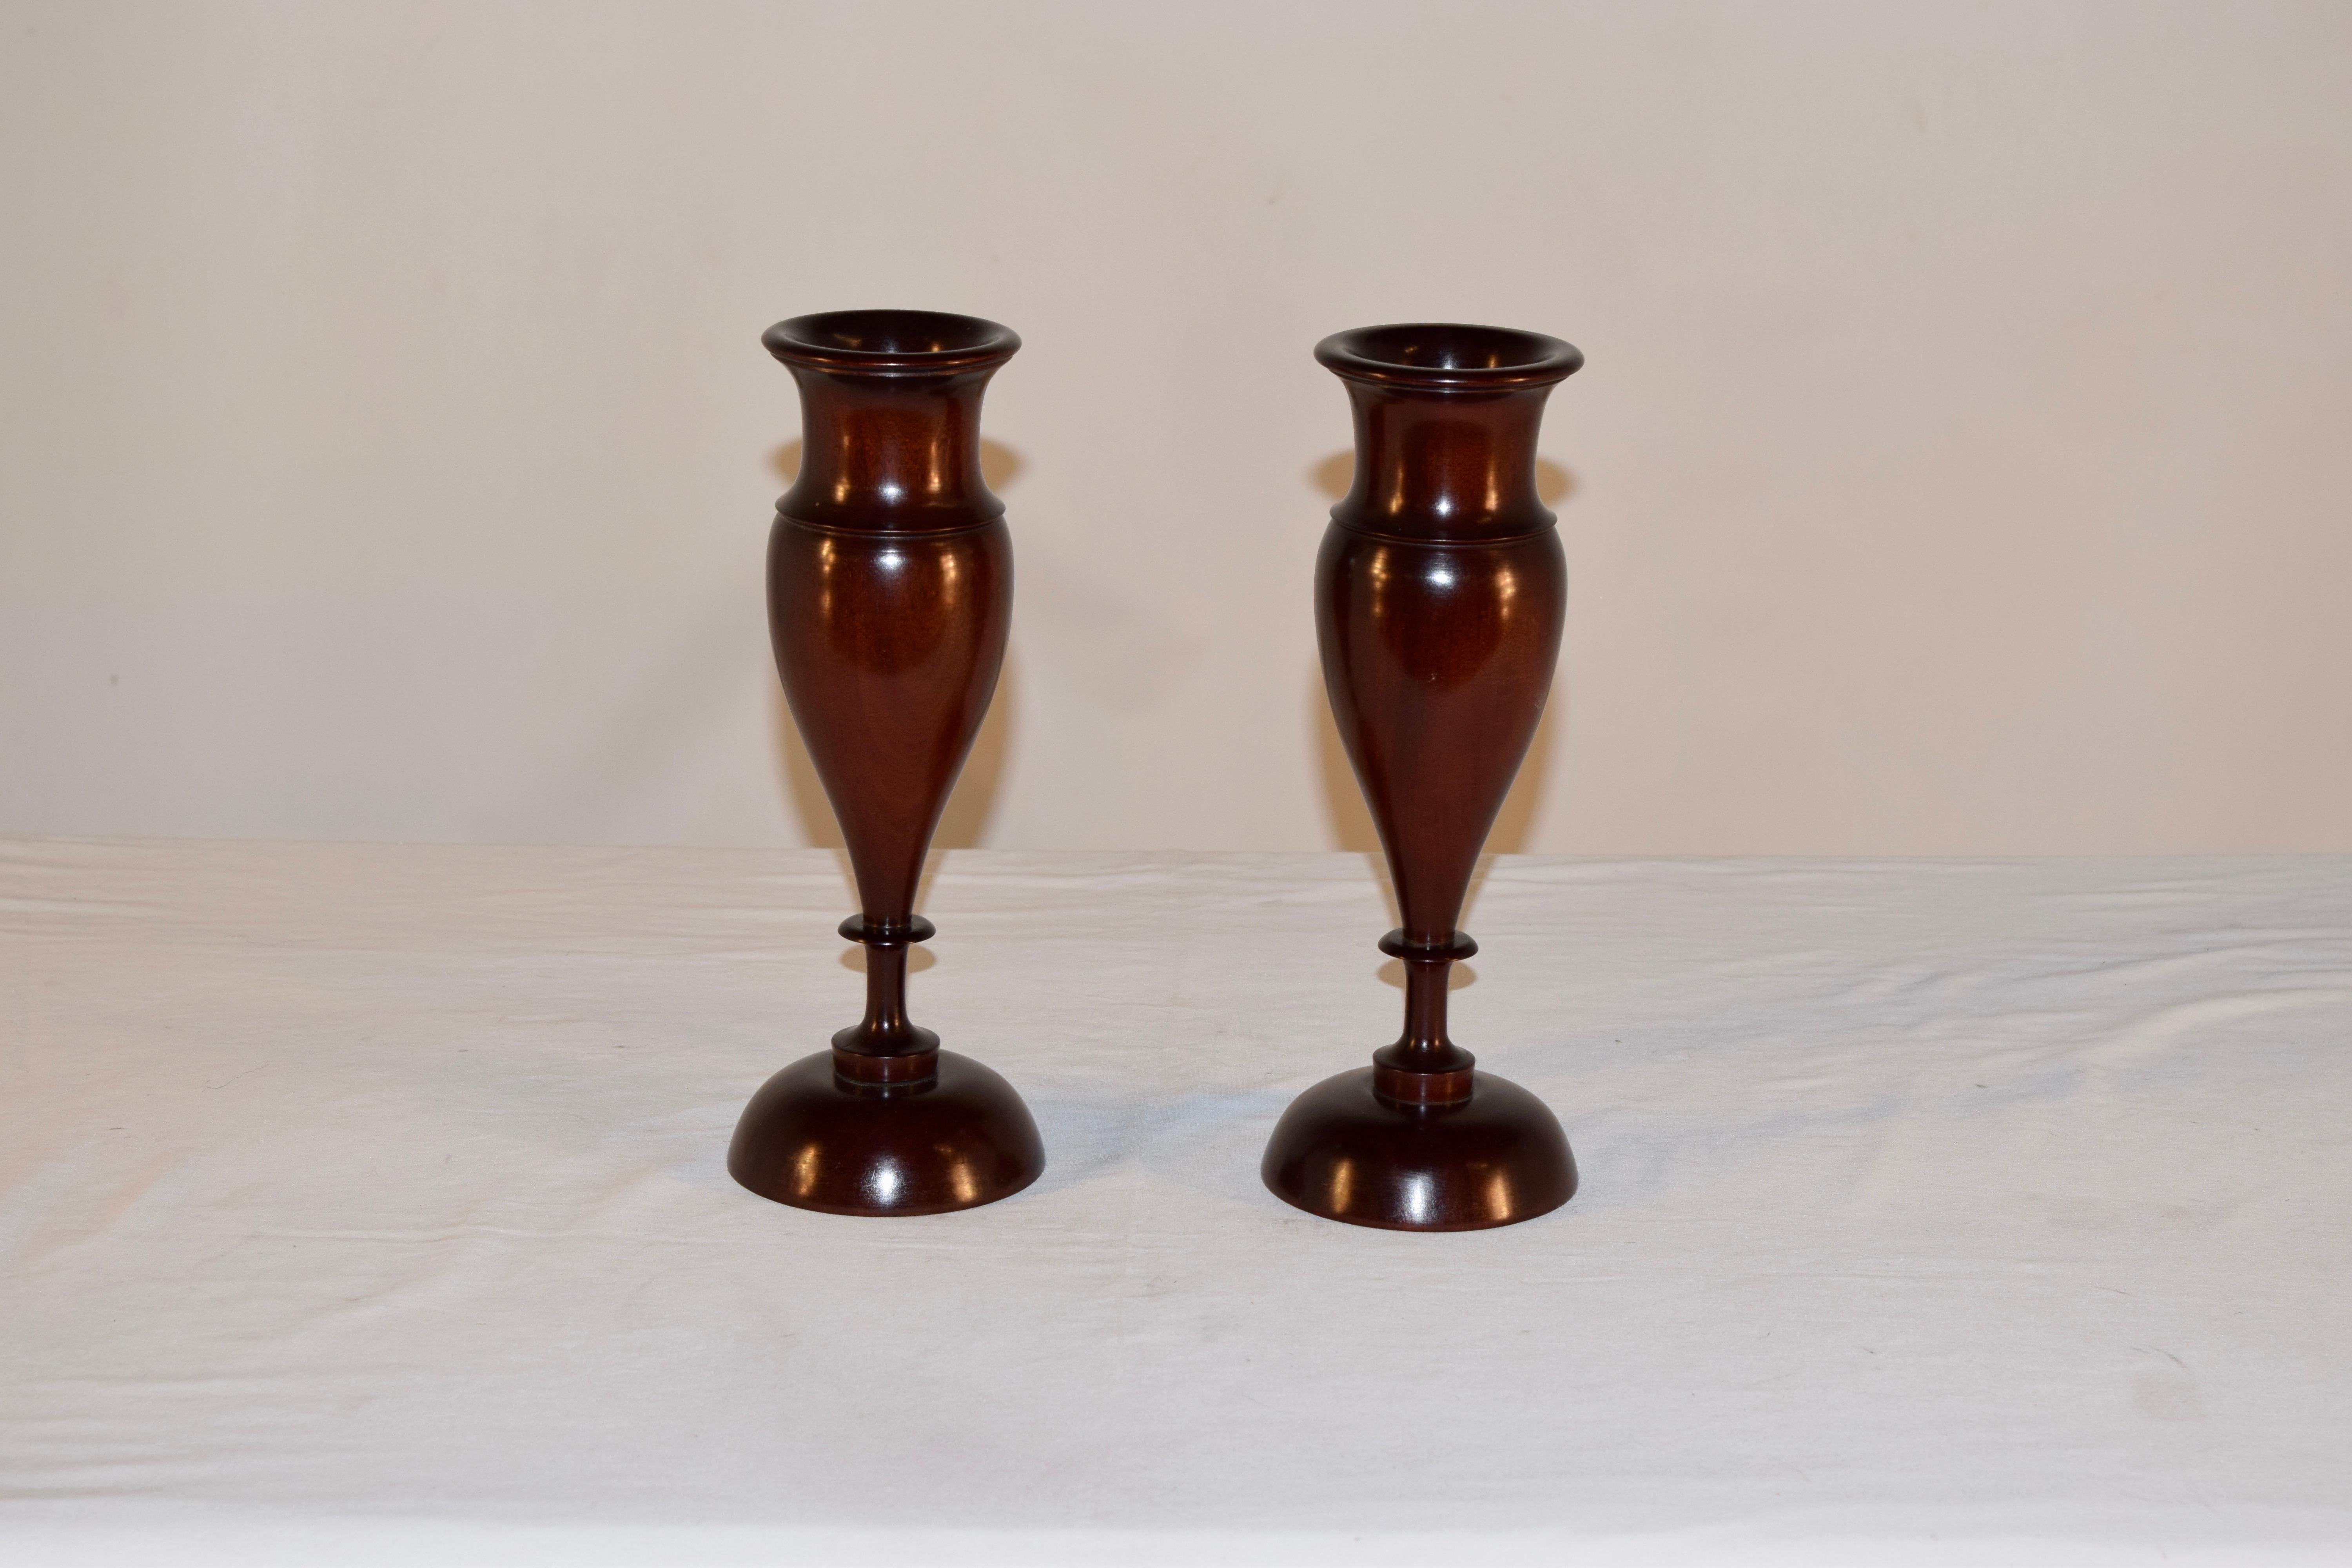 Pair of lignum vitae vases from England circa 1900. They are gracefully hand turned and have a wonderful shape. The turned rims give way to shaped collars and bulbous bases, supported on hand turned dome bases.